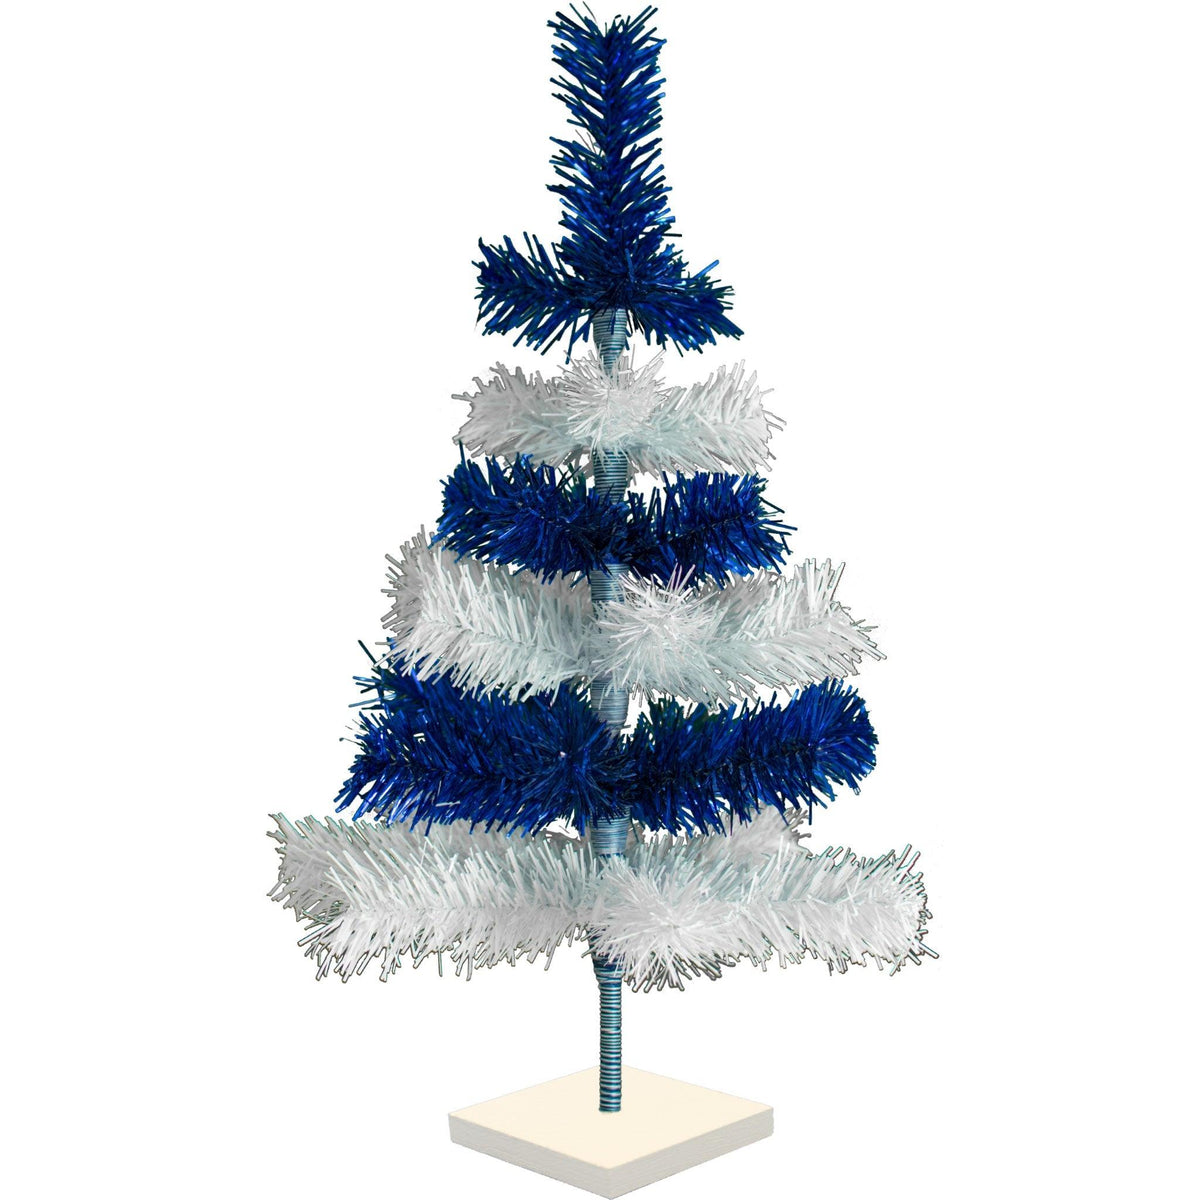 Lee Display's Mardi Gras Themed Christmas Tree on Sale Now 36in